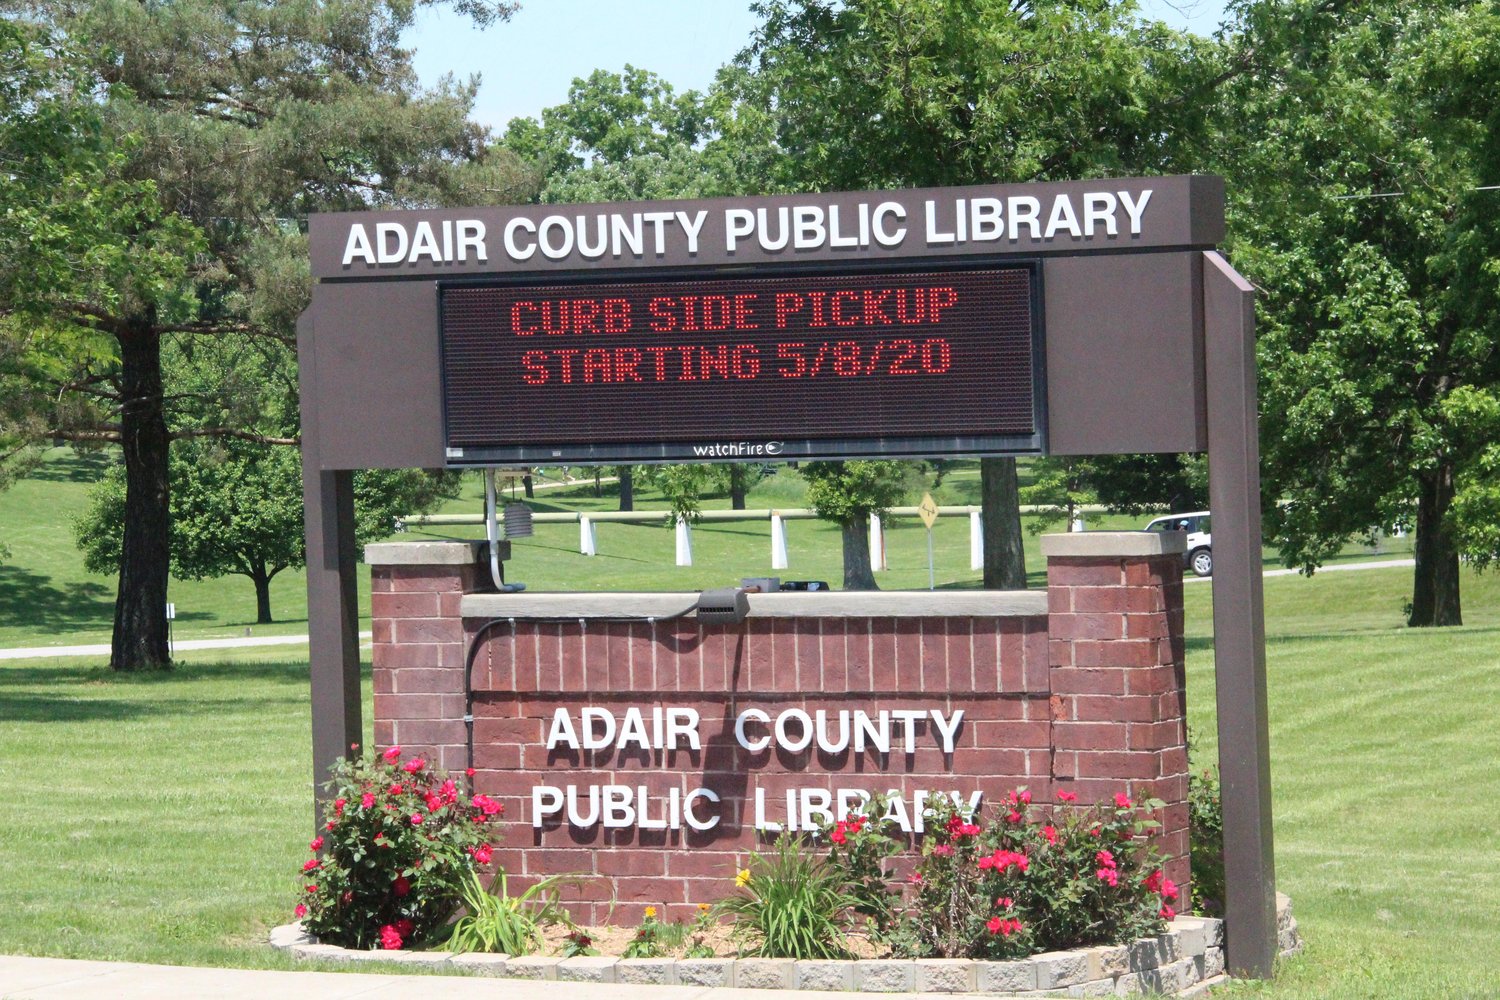 Daily Express file photo of the Adair County Public Library's sign.